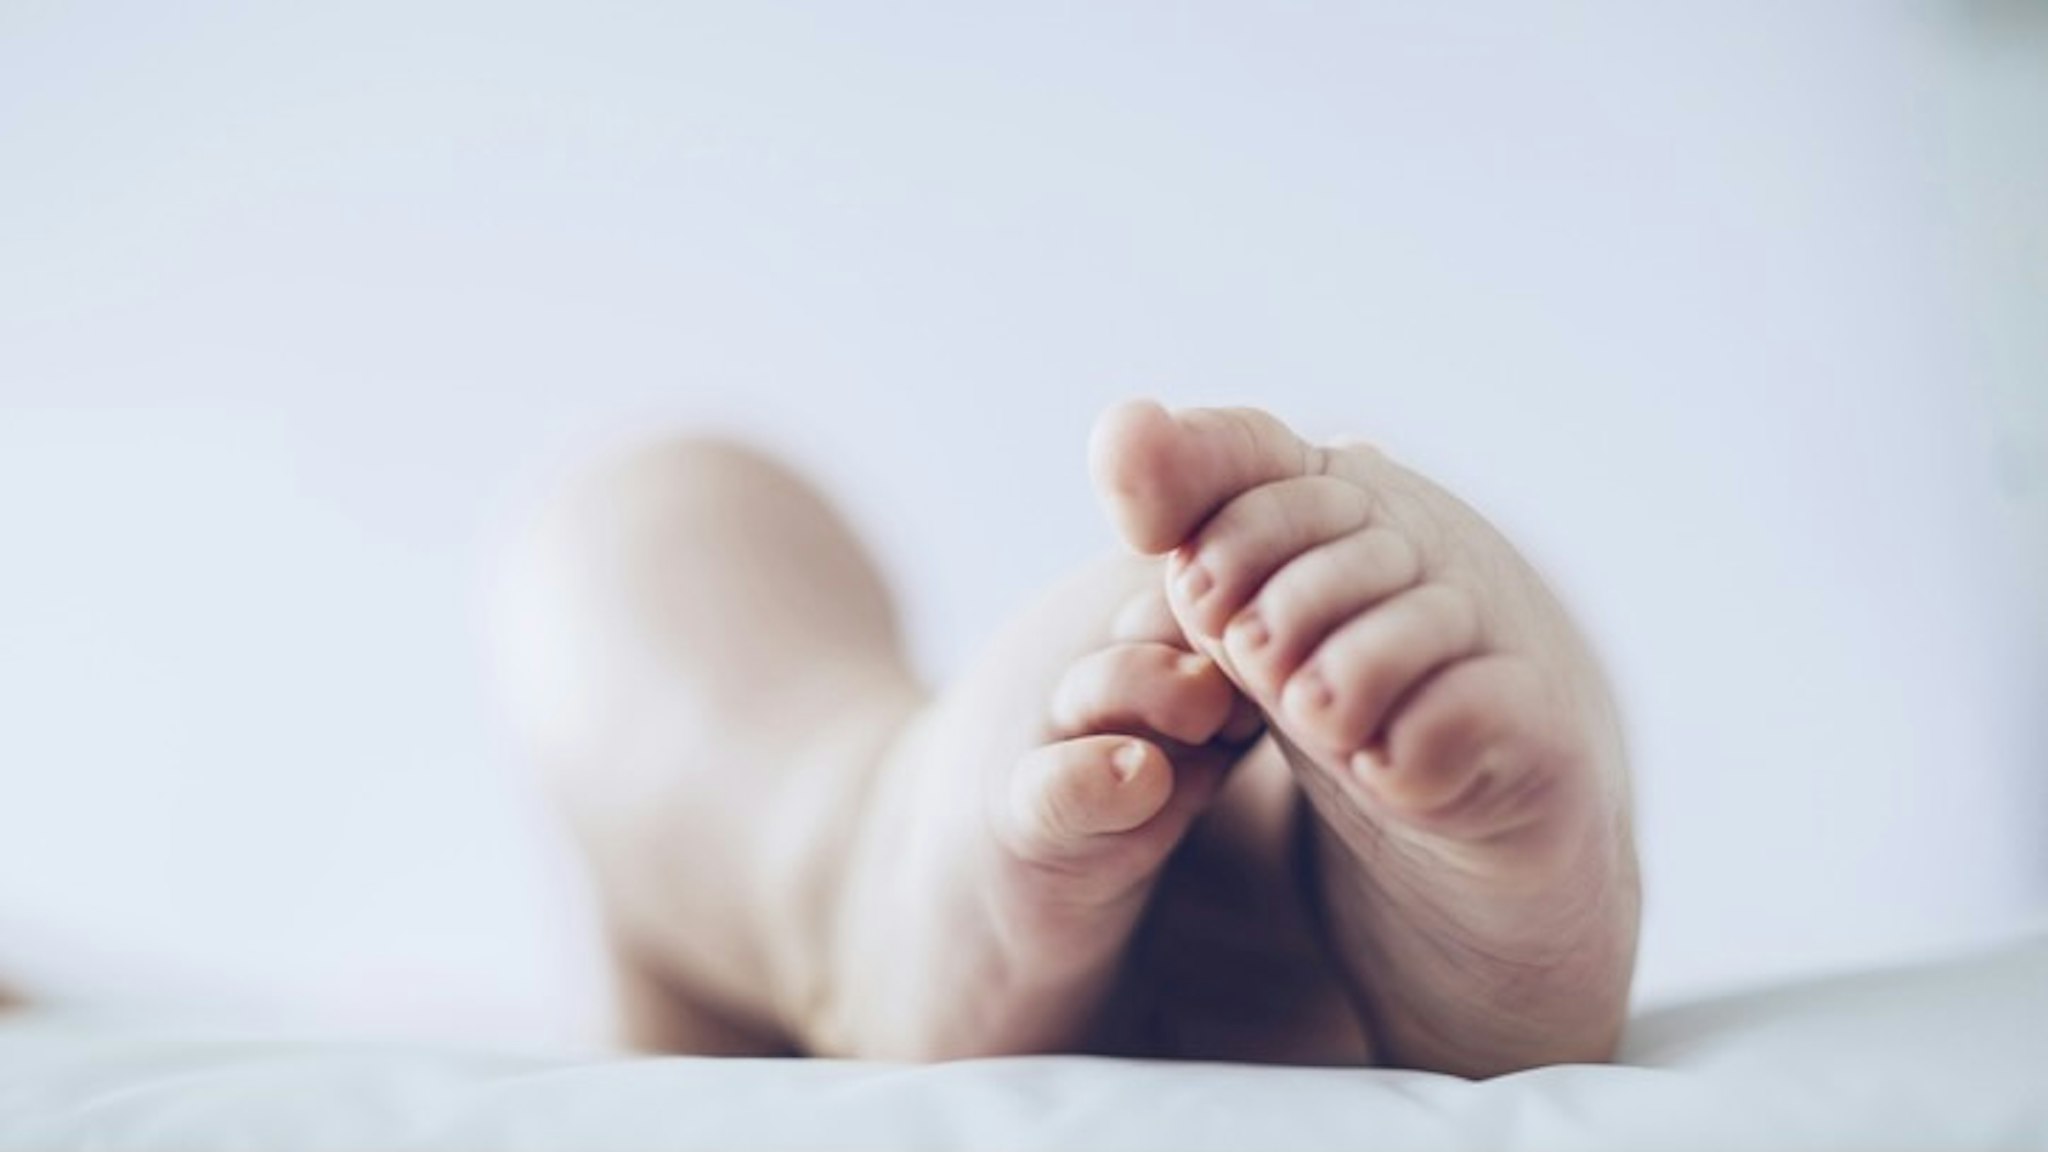 Baby feet. - stock photo Baby feet up in the air lying down. Guido Mieth via Getty Images